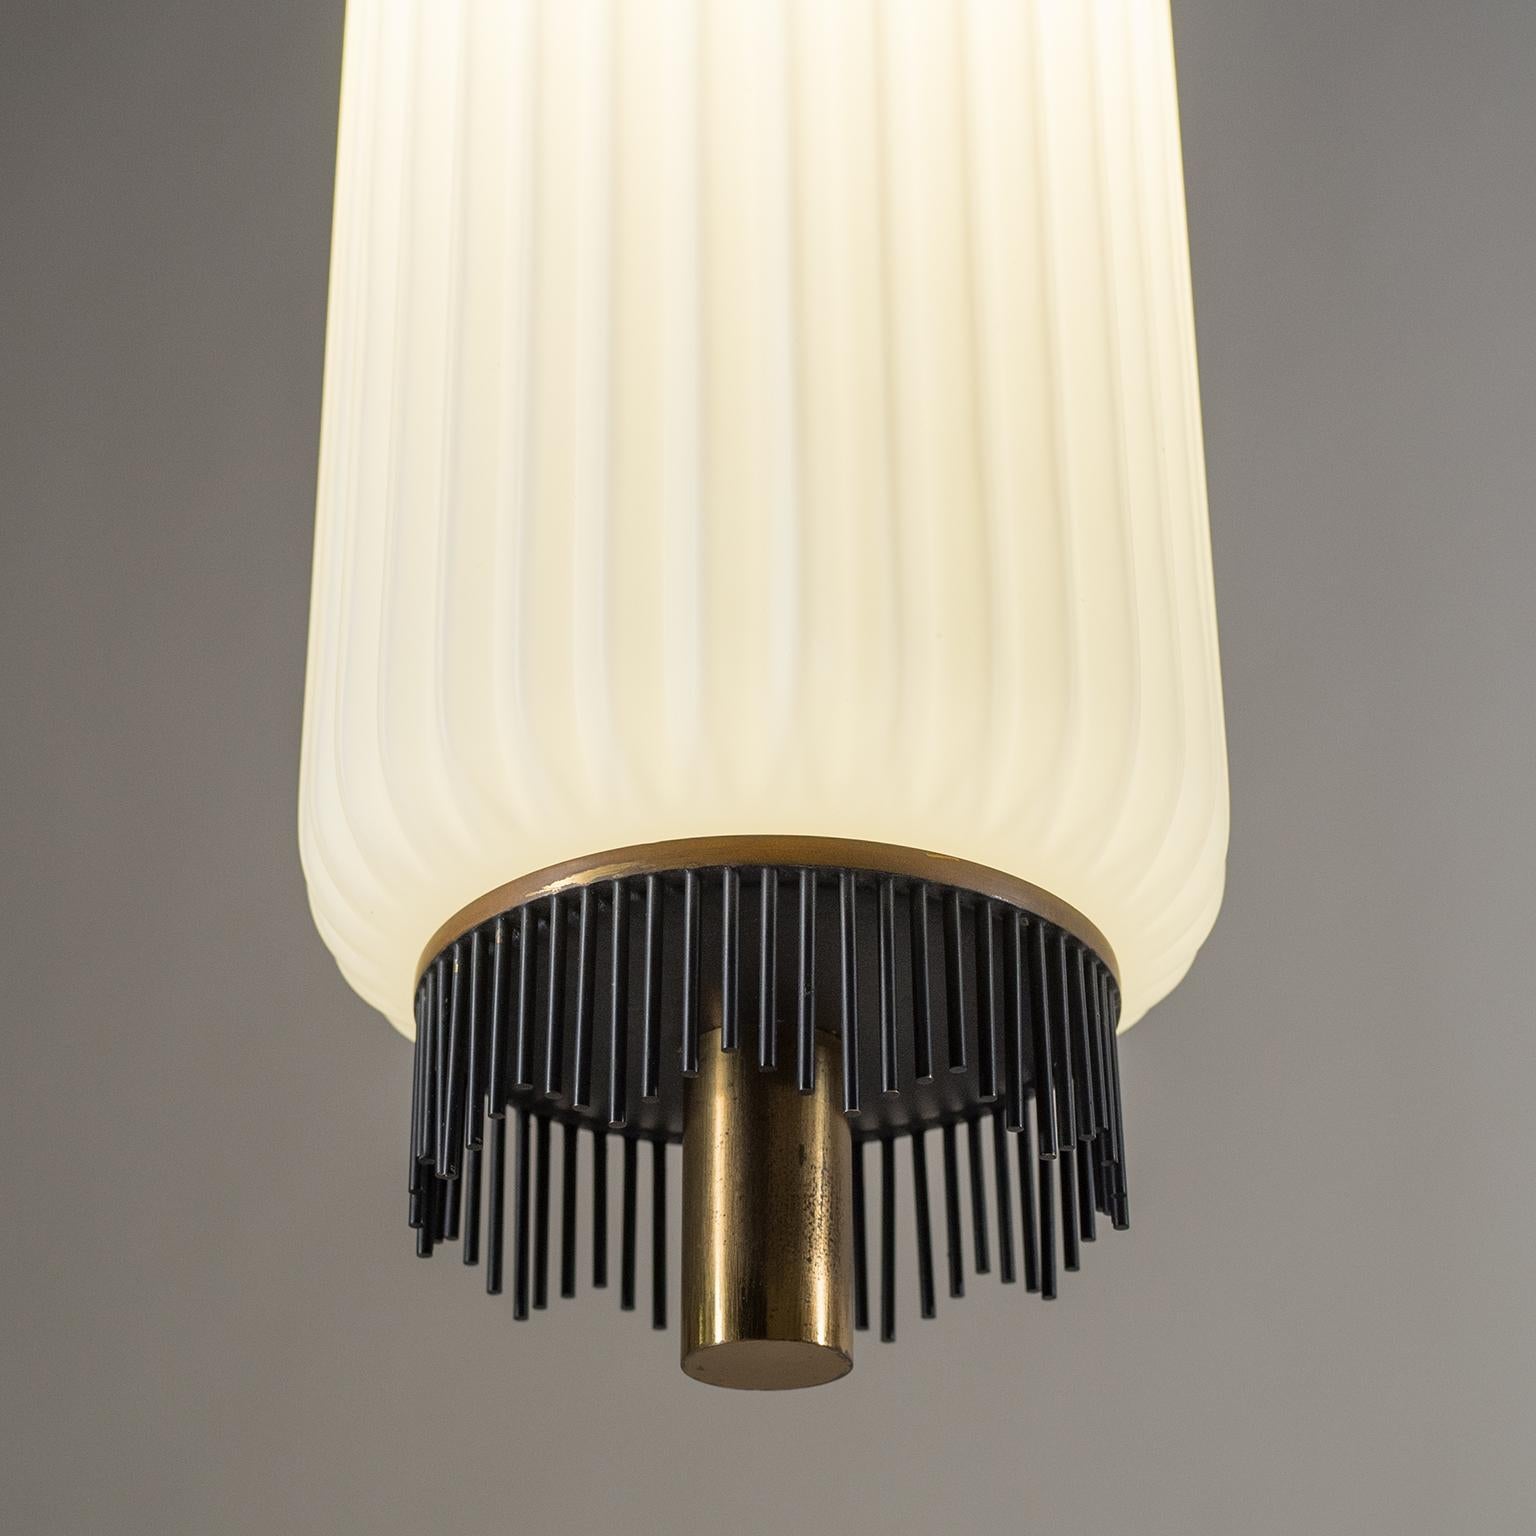 Mid-Century Modern Angelo Lelii Pendant for Arredoluce, circa 1959, Brass and Ribbed Satin Glass